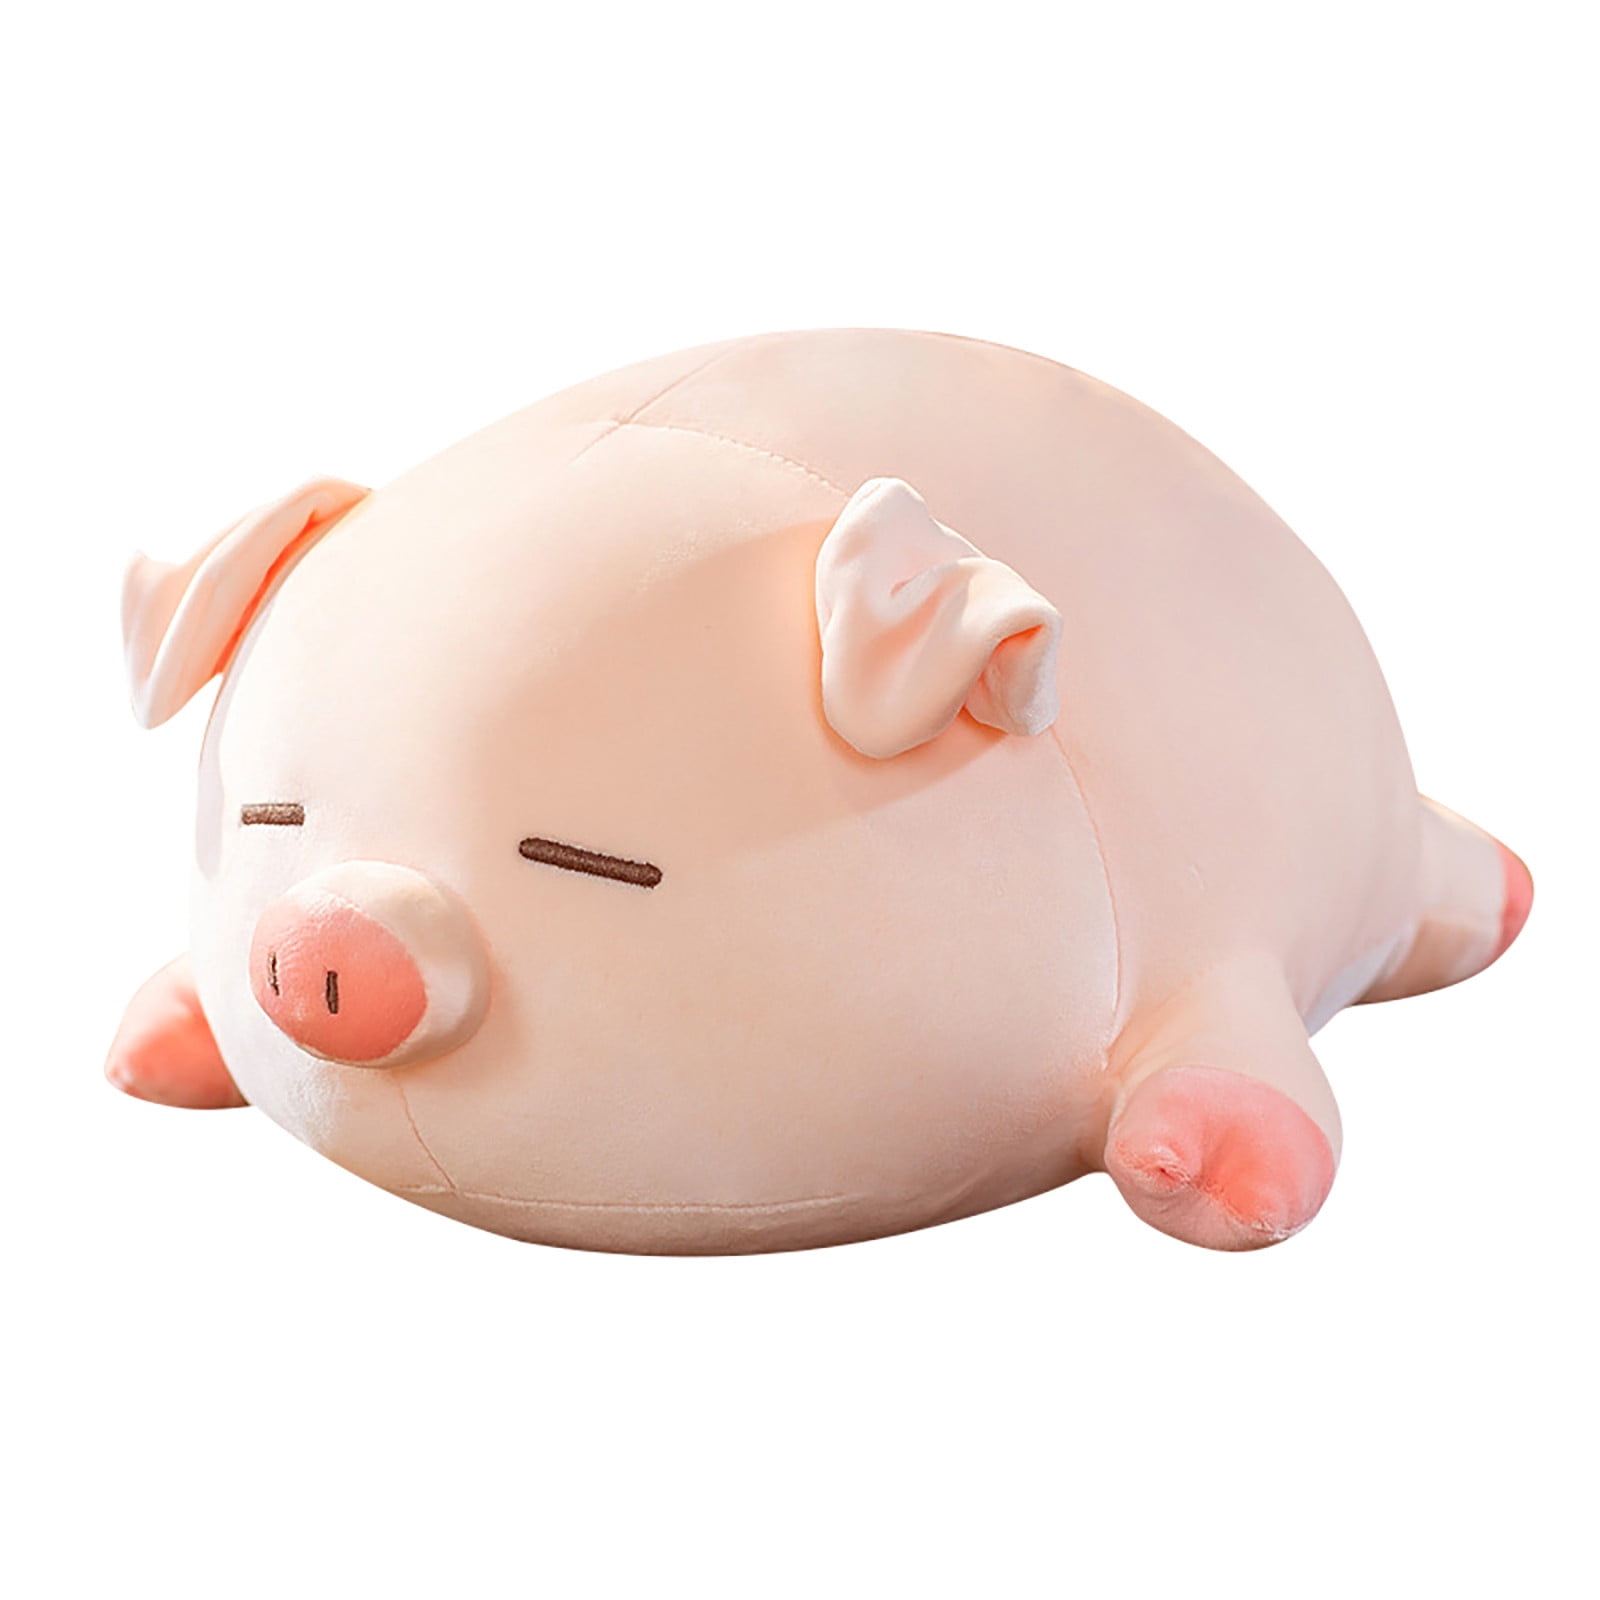 PIG BLACK AND PINK PLUSH 20cm SOFT CUDDLY FLUFFY REALISTIC TOY PIGLET